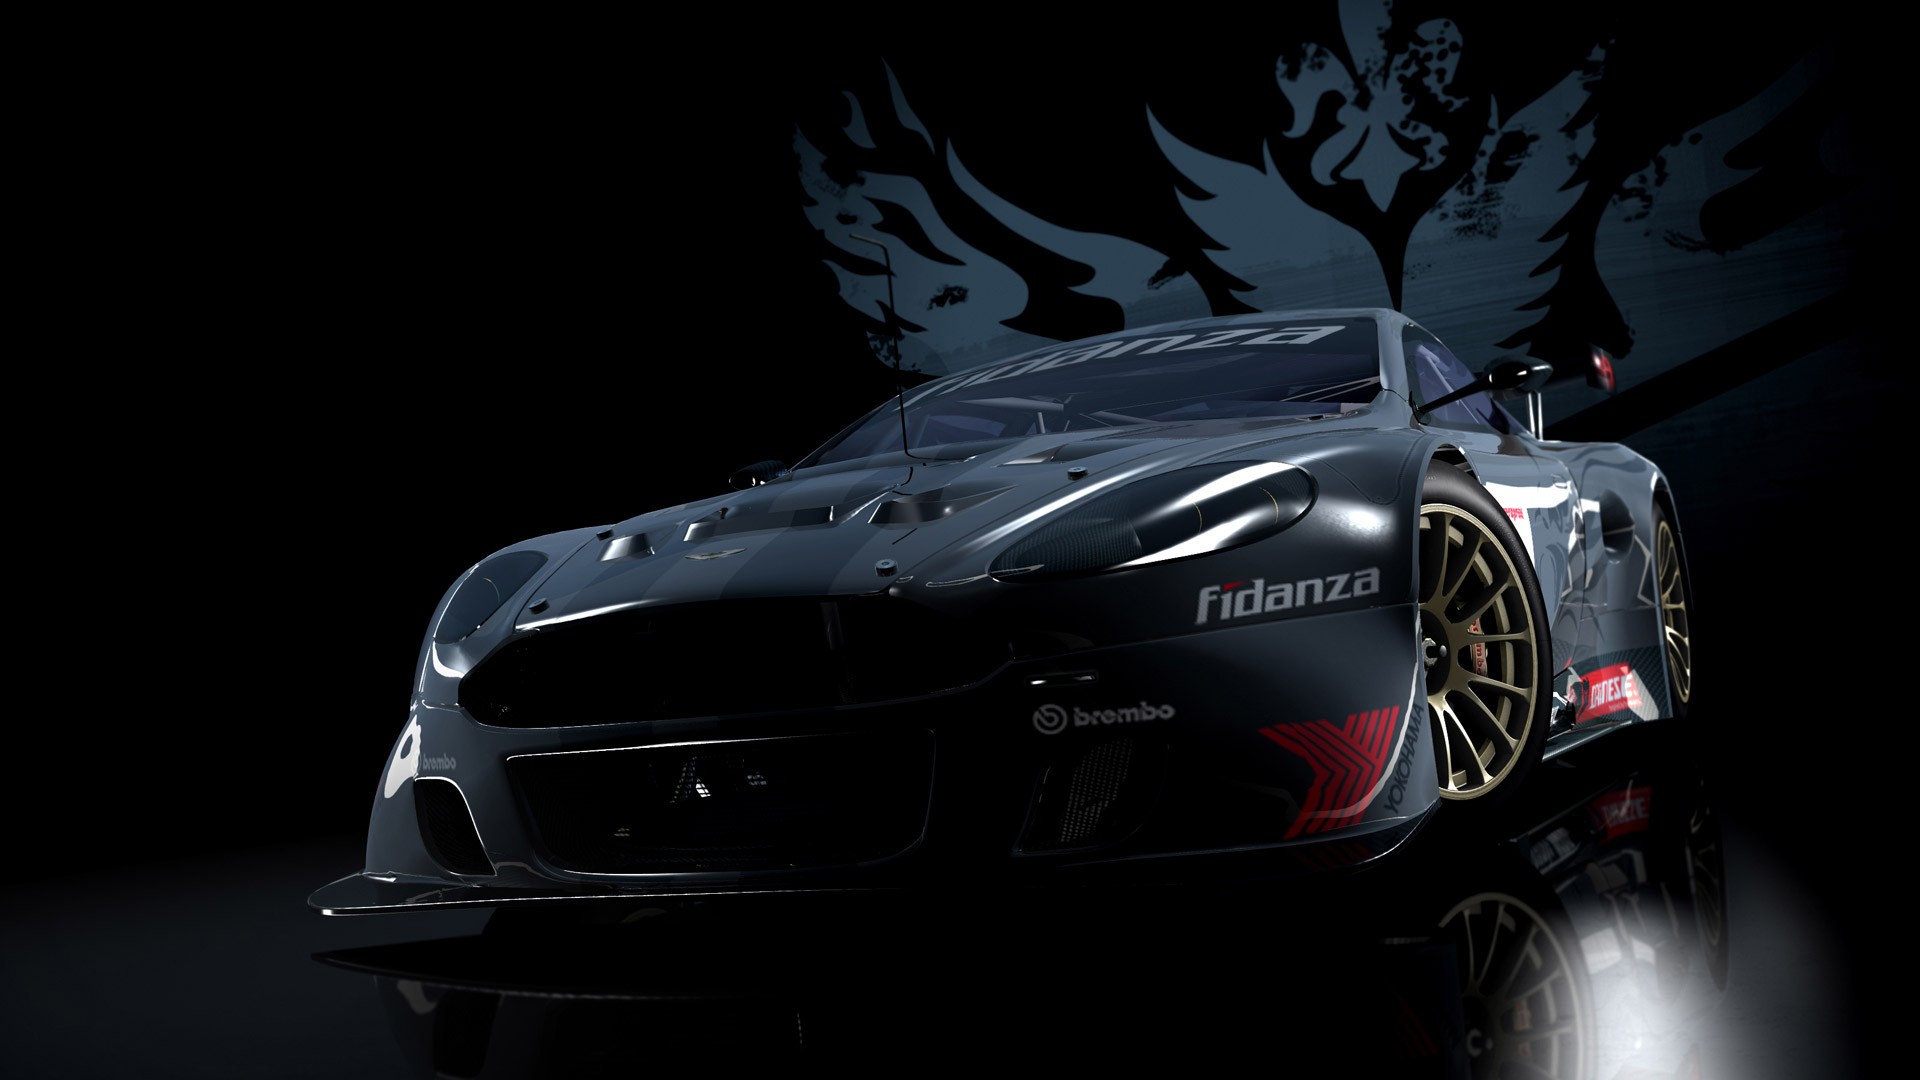 General 1920x1080 Race Driver: GRID Aston Martin video games car reflection vehicle black background